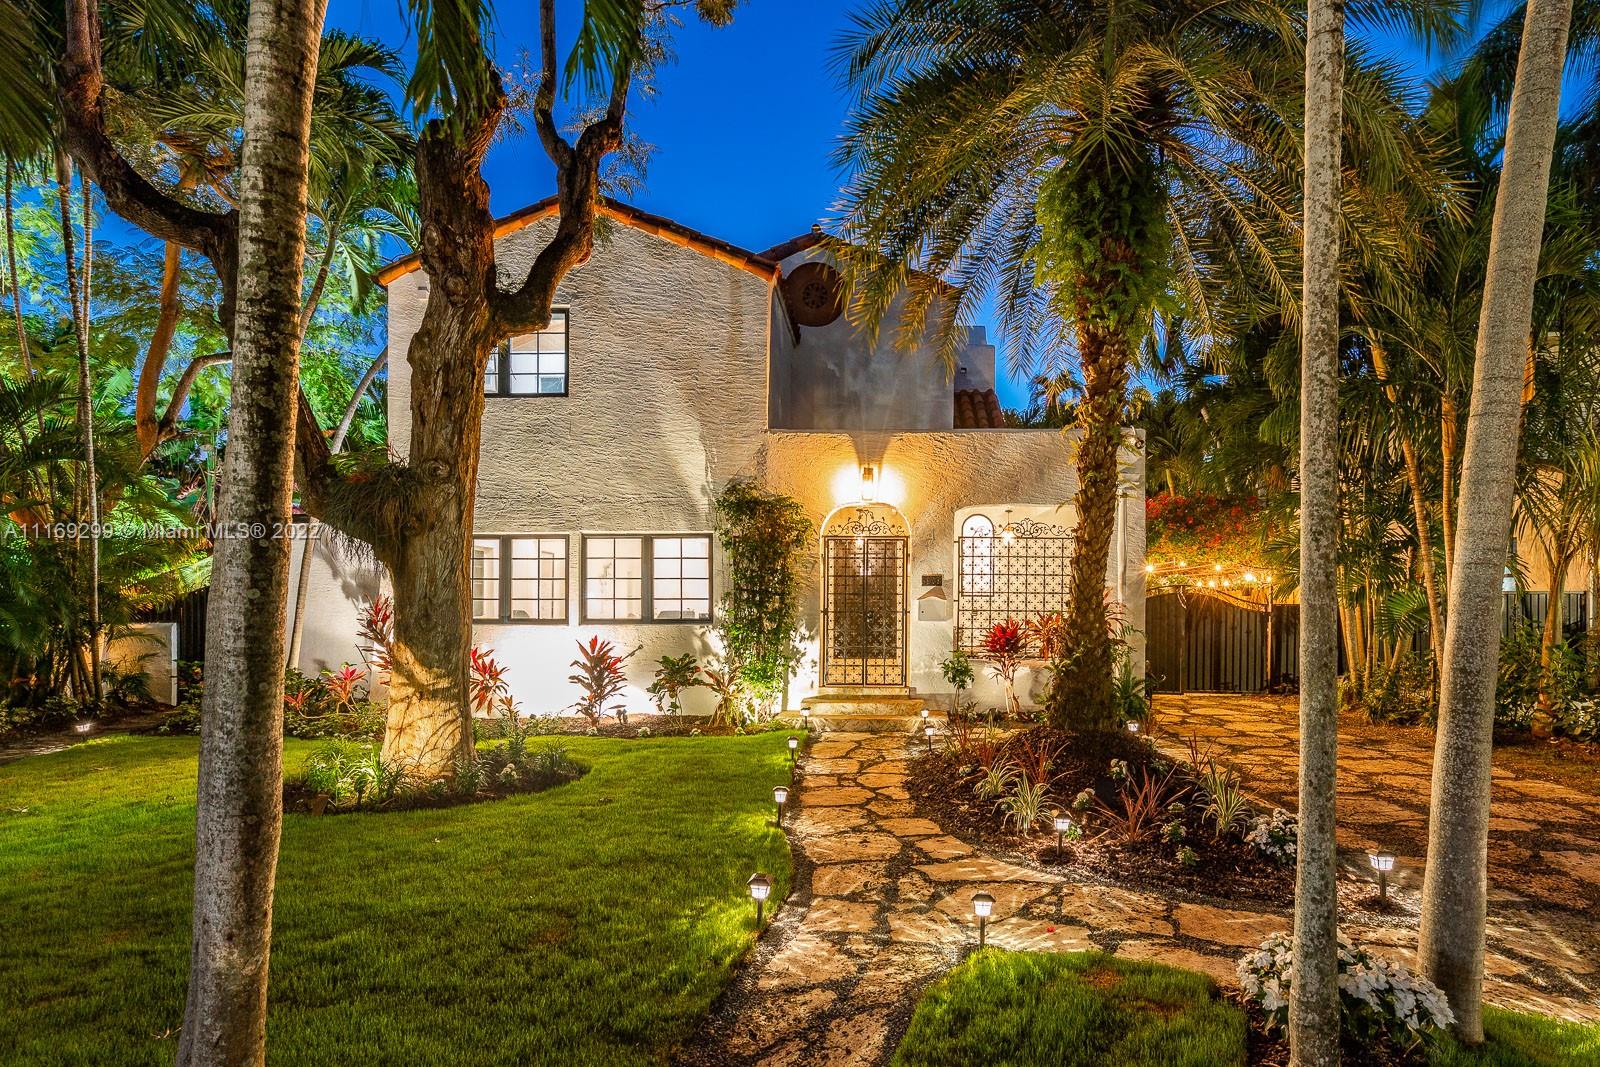 One of the largest lots in the area, this exceptionally beautiful Mediterranean combines
original architecture and modern designer interiors in the coveted Morningside Historic District.
Breathtaking 4BD/5.5BA main residence delivers sun-splashed open living spaces with hardwood floors,
soaring ceilings, art walls and a seamless indoor/outdoor flow. Enjoy a large living room with fireplace,
formal dining room, eat-in chef's kitchen, wet bar, laundry and luxurious guest rooms. Phenomenal
owner's suite with sitting area, spa bath and WIC, plus separate casita with kitchenette. Lush outdoor
spaces include a lovely entry courtyard, exquisite front yard and a backyard oasis with decks, pool/spa
and fire pit surrounded by dozens of palms. Outstanding curb appeal. Excellent location.